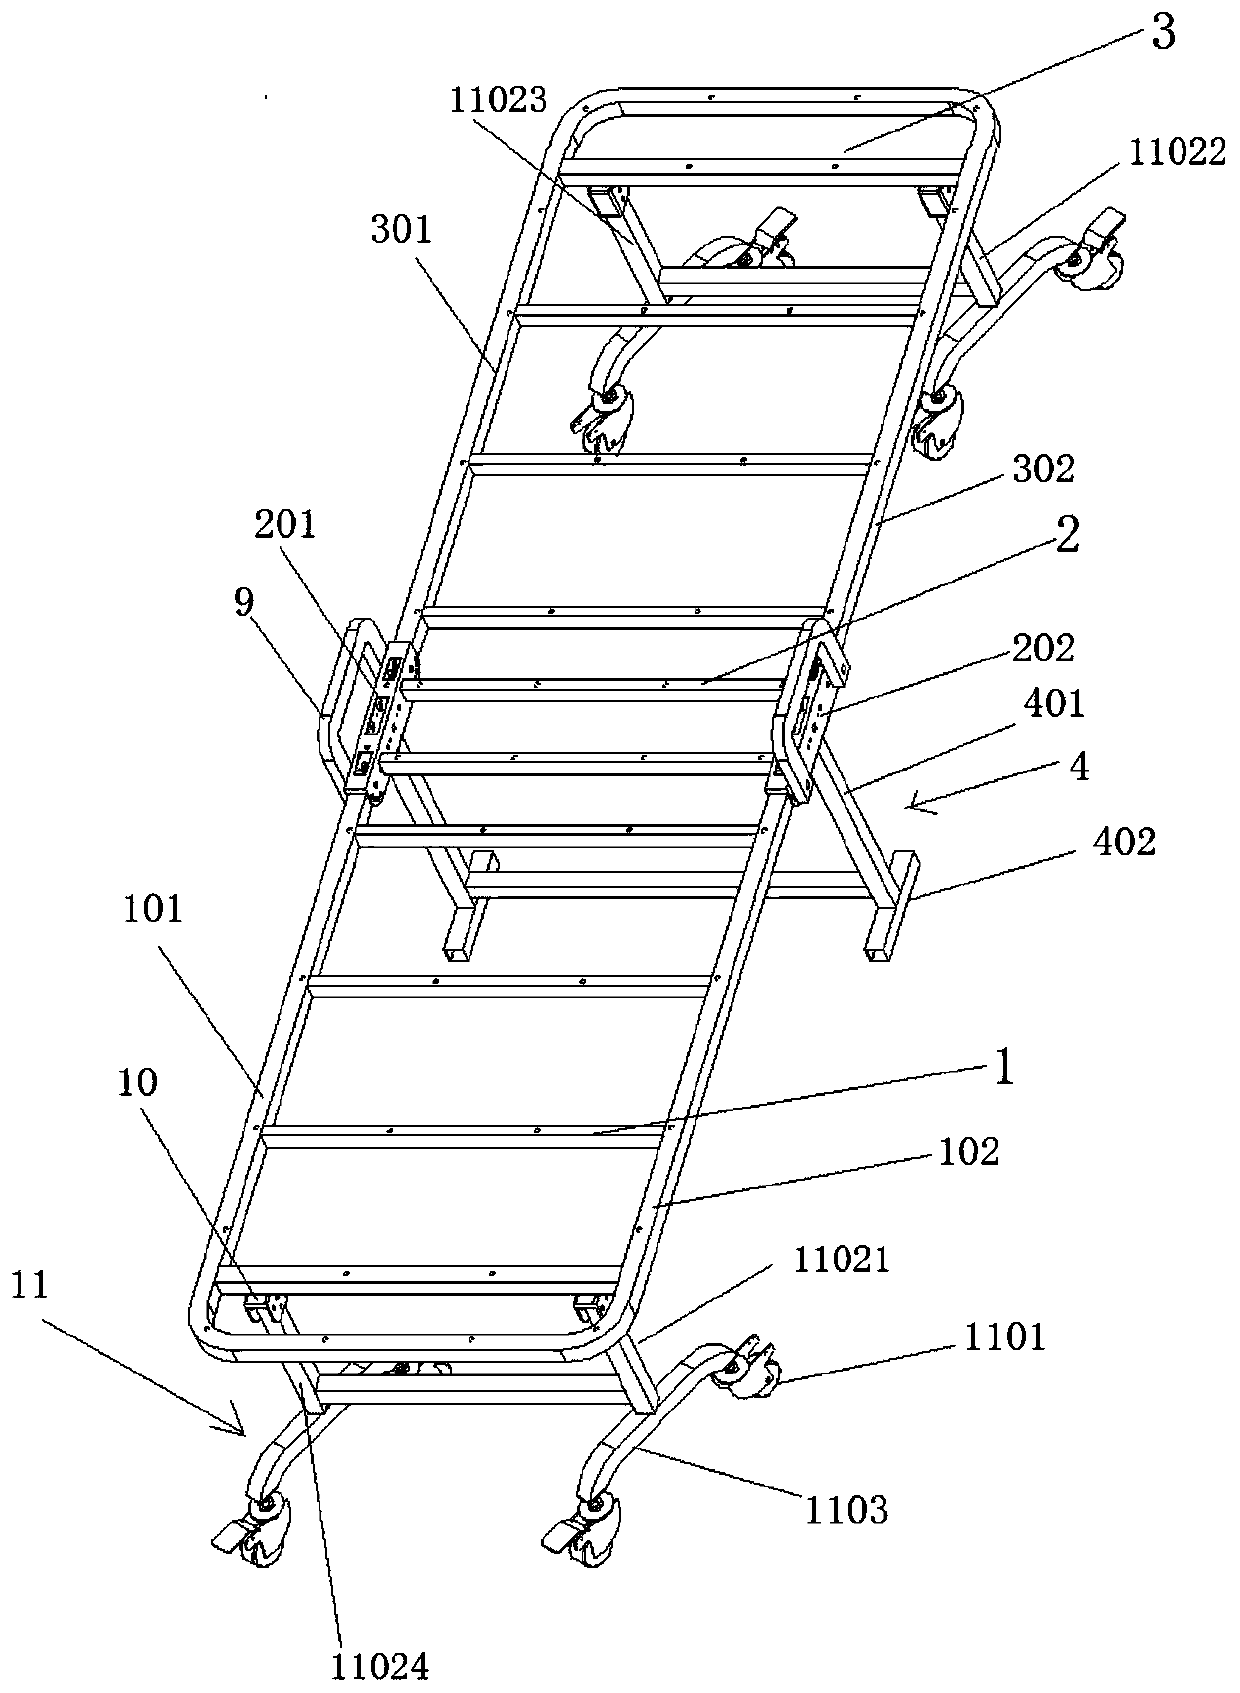 High-stability movable accompanying bed